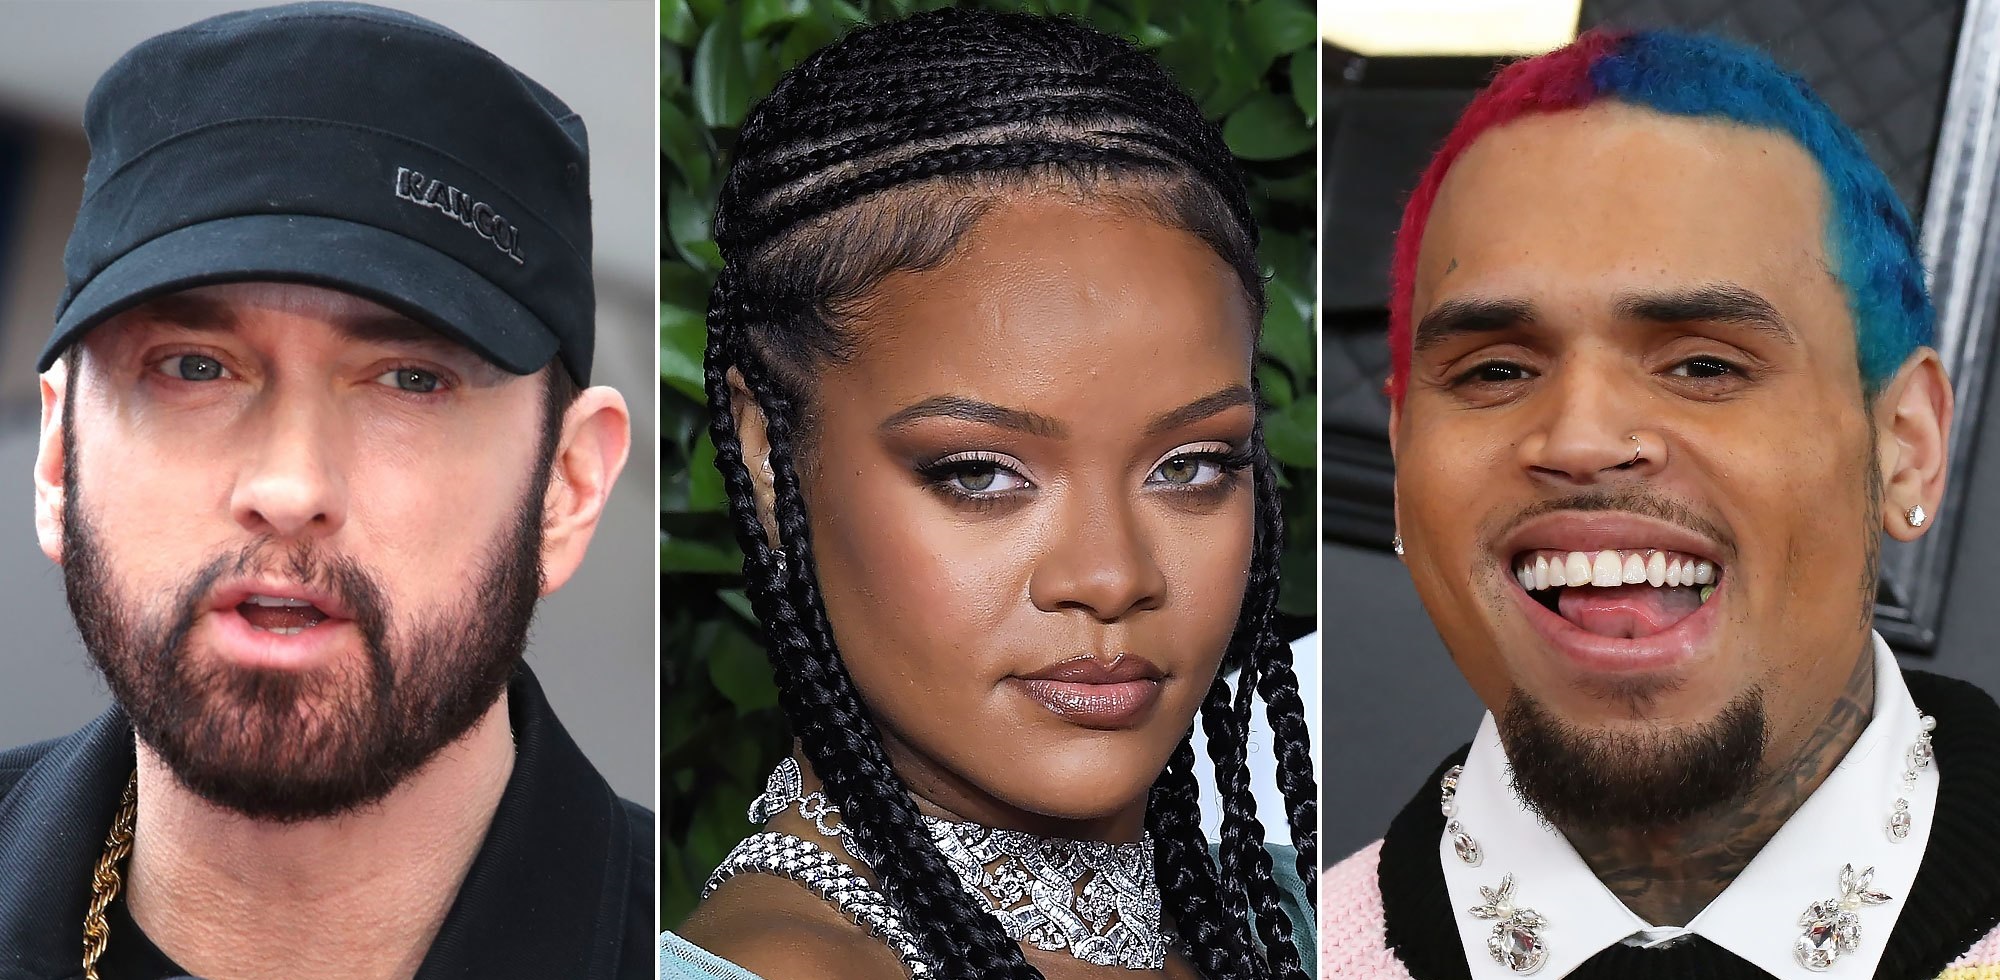 Eminem Apolgizes To Rihanna Over Chris Brown References in New Song